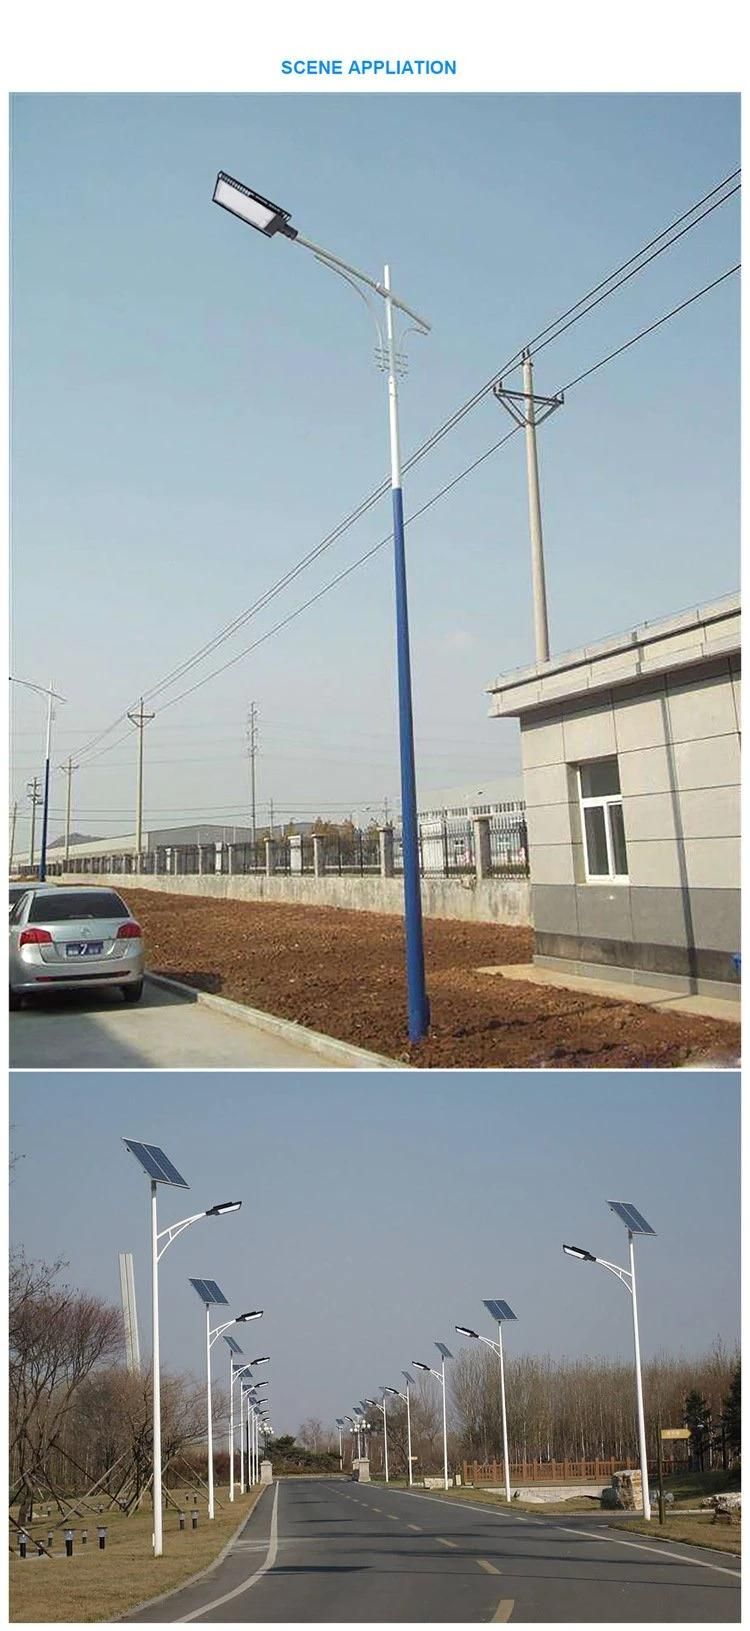 High Efficiency Integrated Outdoor Waterproof 30W-150W All in One Solar LED Street Lamp